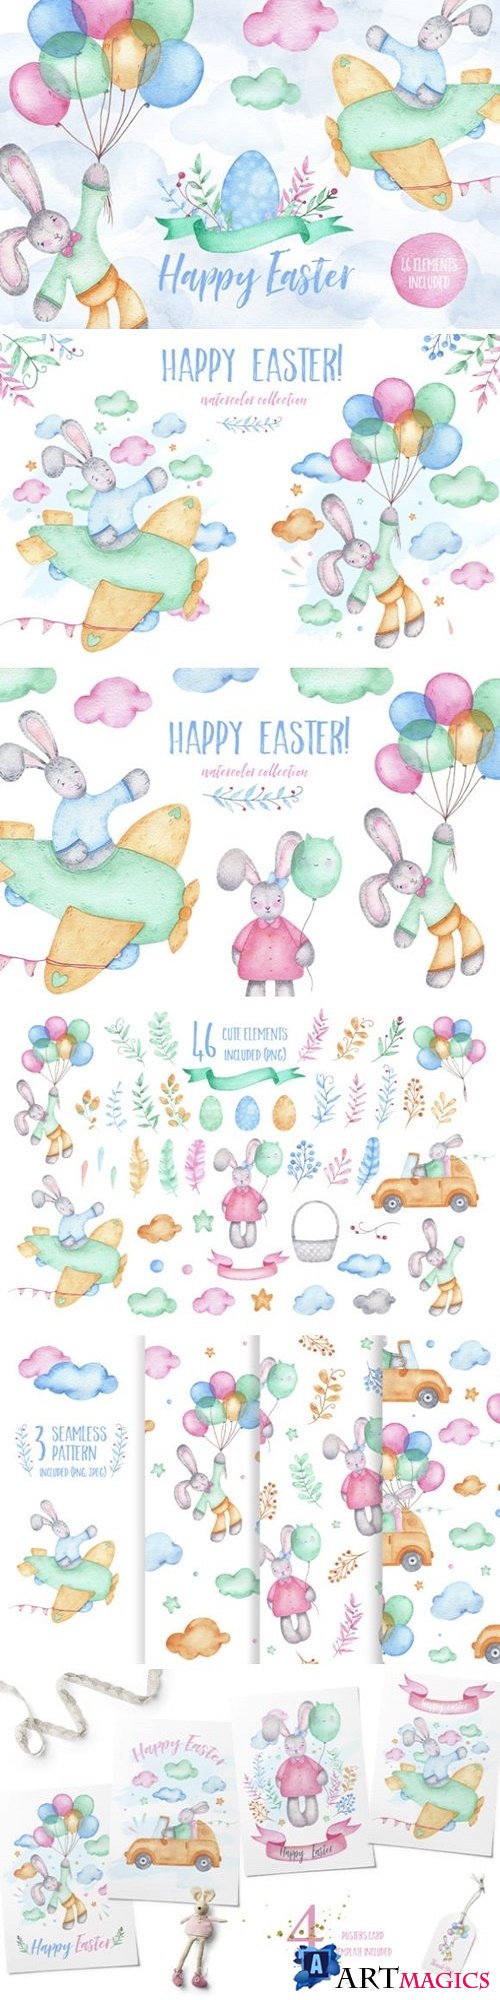 Happy Easter - watercolor clipart - 3385840